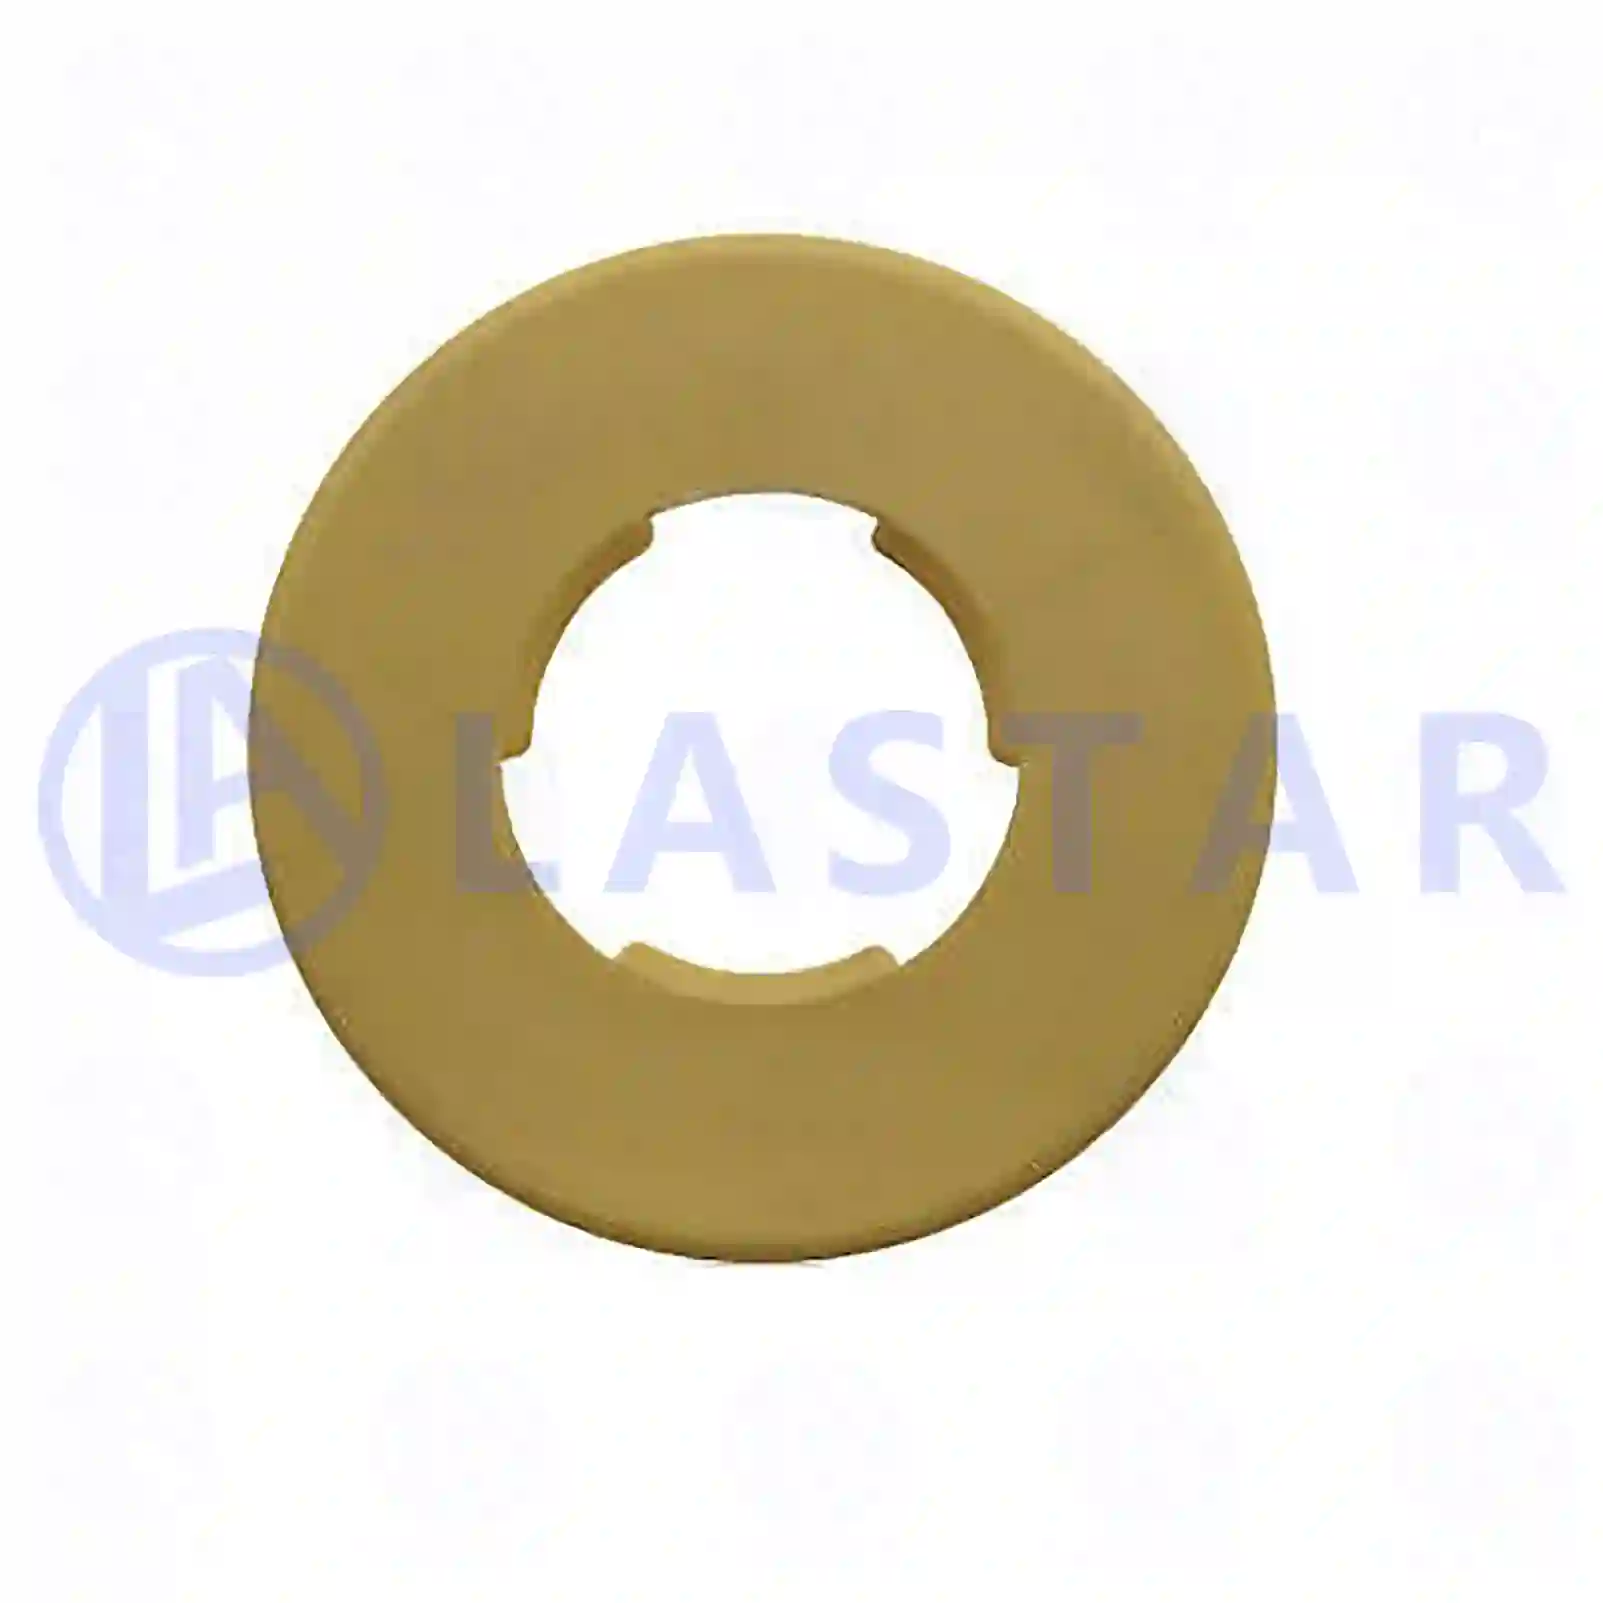 Washer, 77730036, 1788232, 2031802, 2285645 ||  77730036 Lastar Spare Part | Truck Spare Parts, Auotomotive Spare Parts Washer, 77730036, 1788232, 2031802, 2285645 ||  77730036 Lastar Spare Part | Truck Spare Parts, Auotomotive Spare Parts